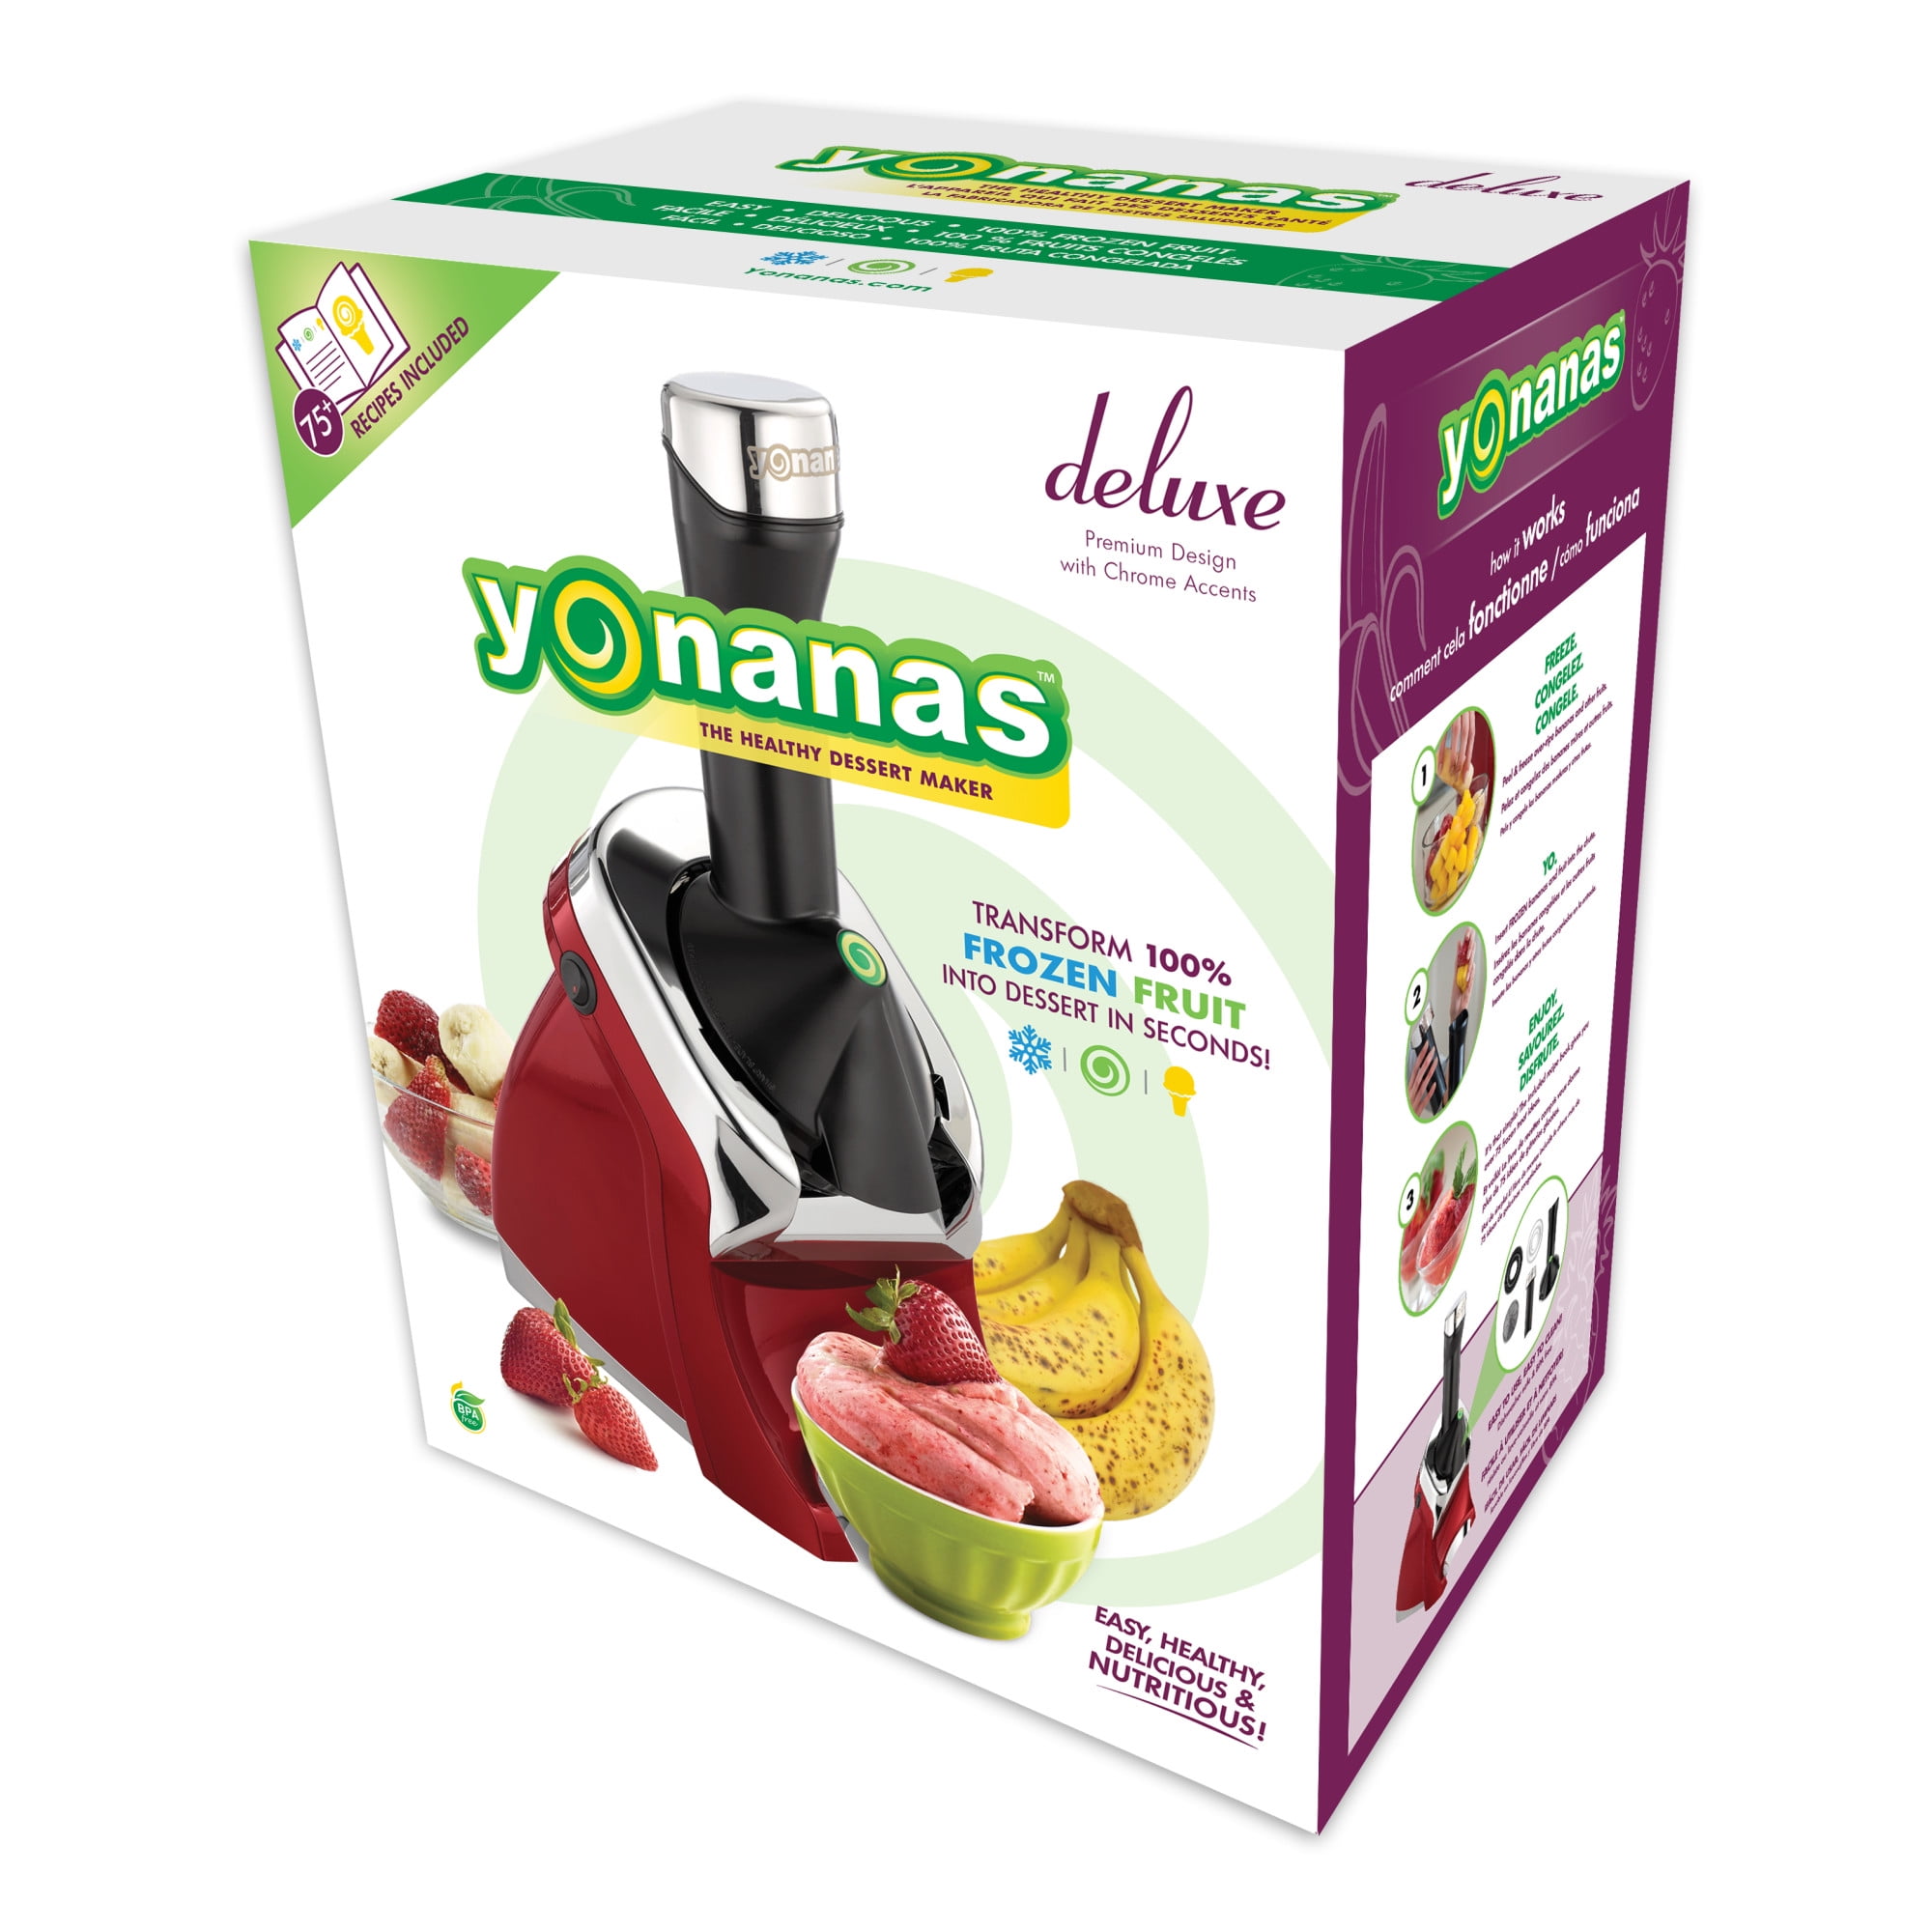 Yonanas 986 Deluxe Elite Healthy Soft-Serve Dessert Maker, with Expanded Recipe Book